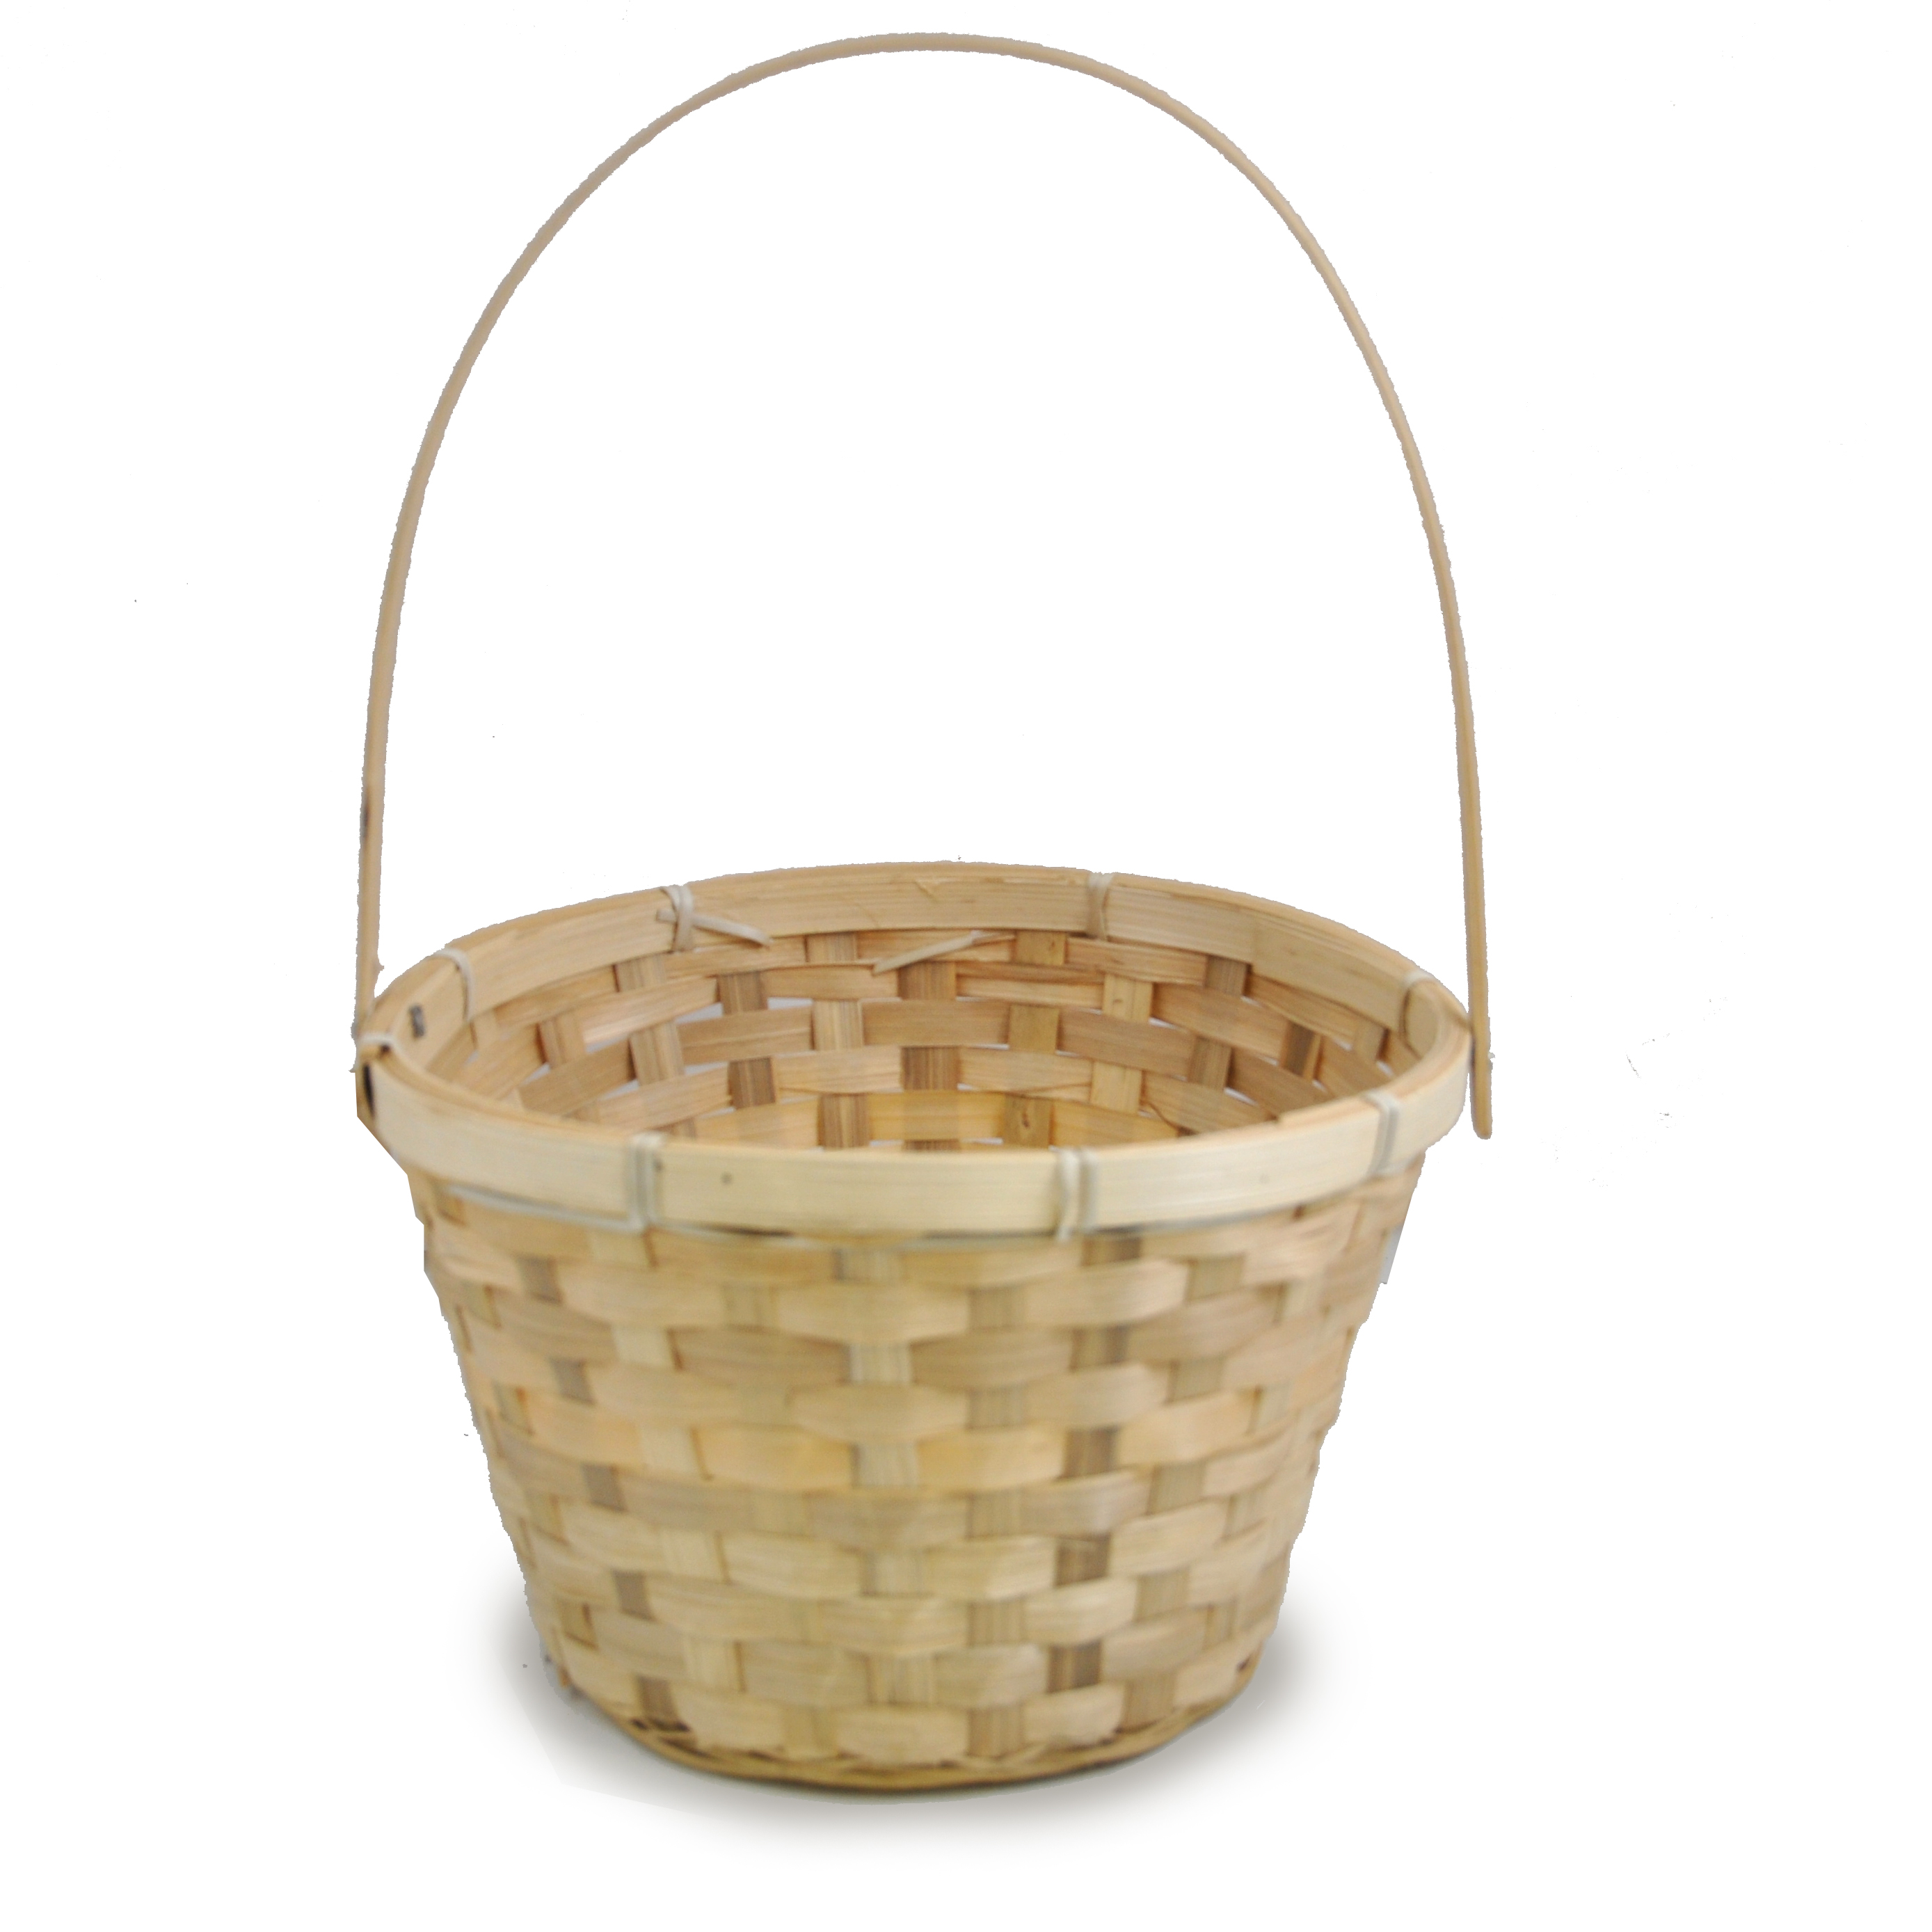 Free photo: Bamboo Basket - Bamboo, Baskets, Container ...